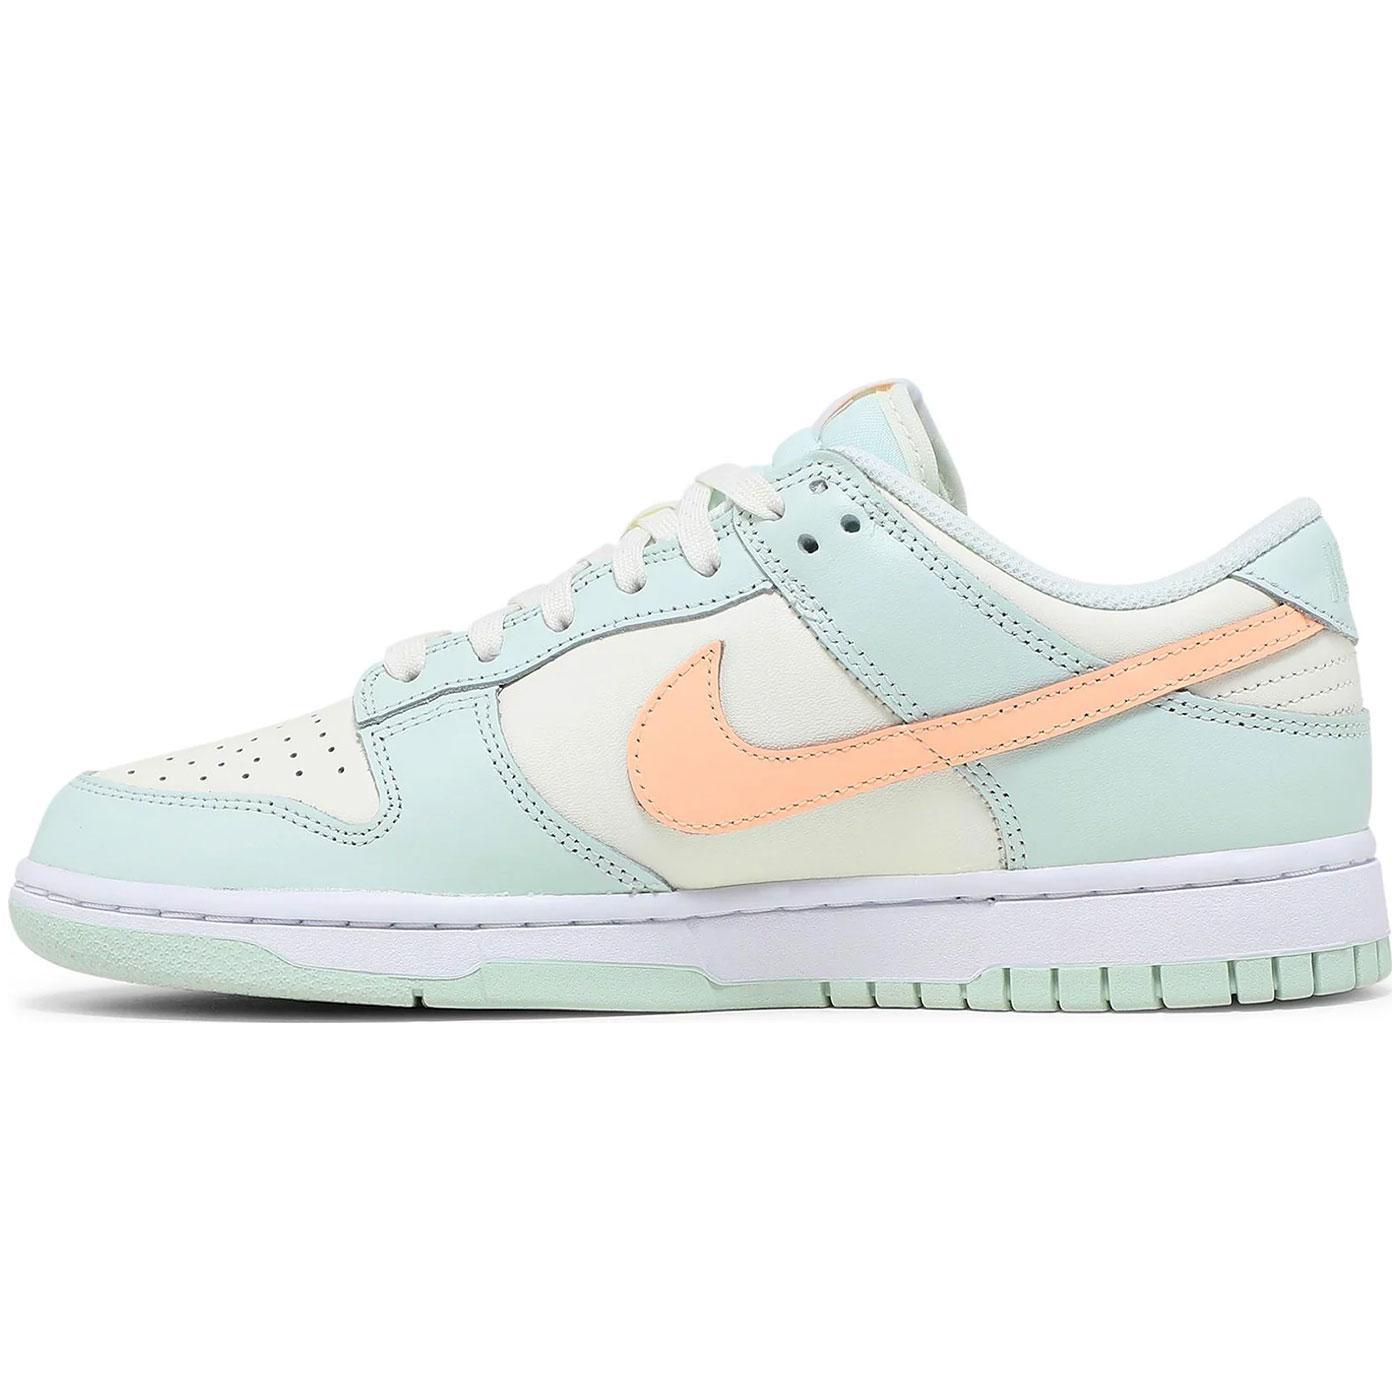 Wmns Dunk Low 'Barely Green' DD1503 104 Side | Nike